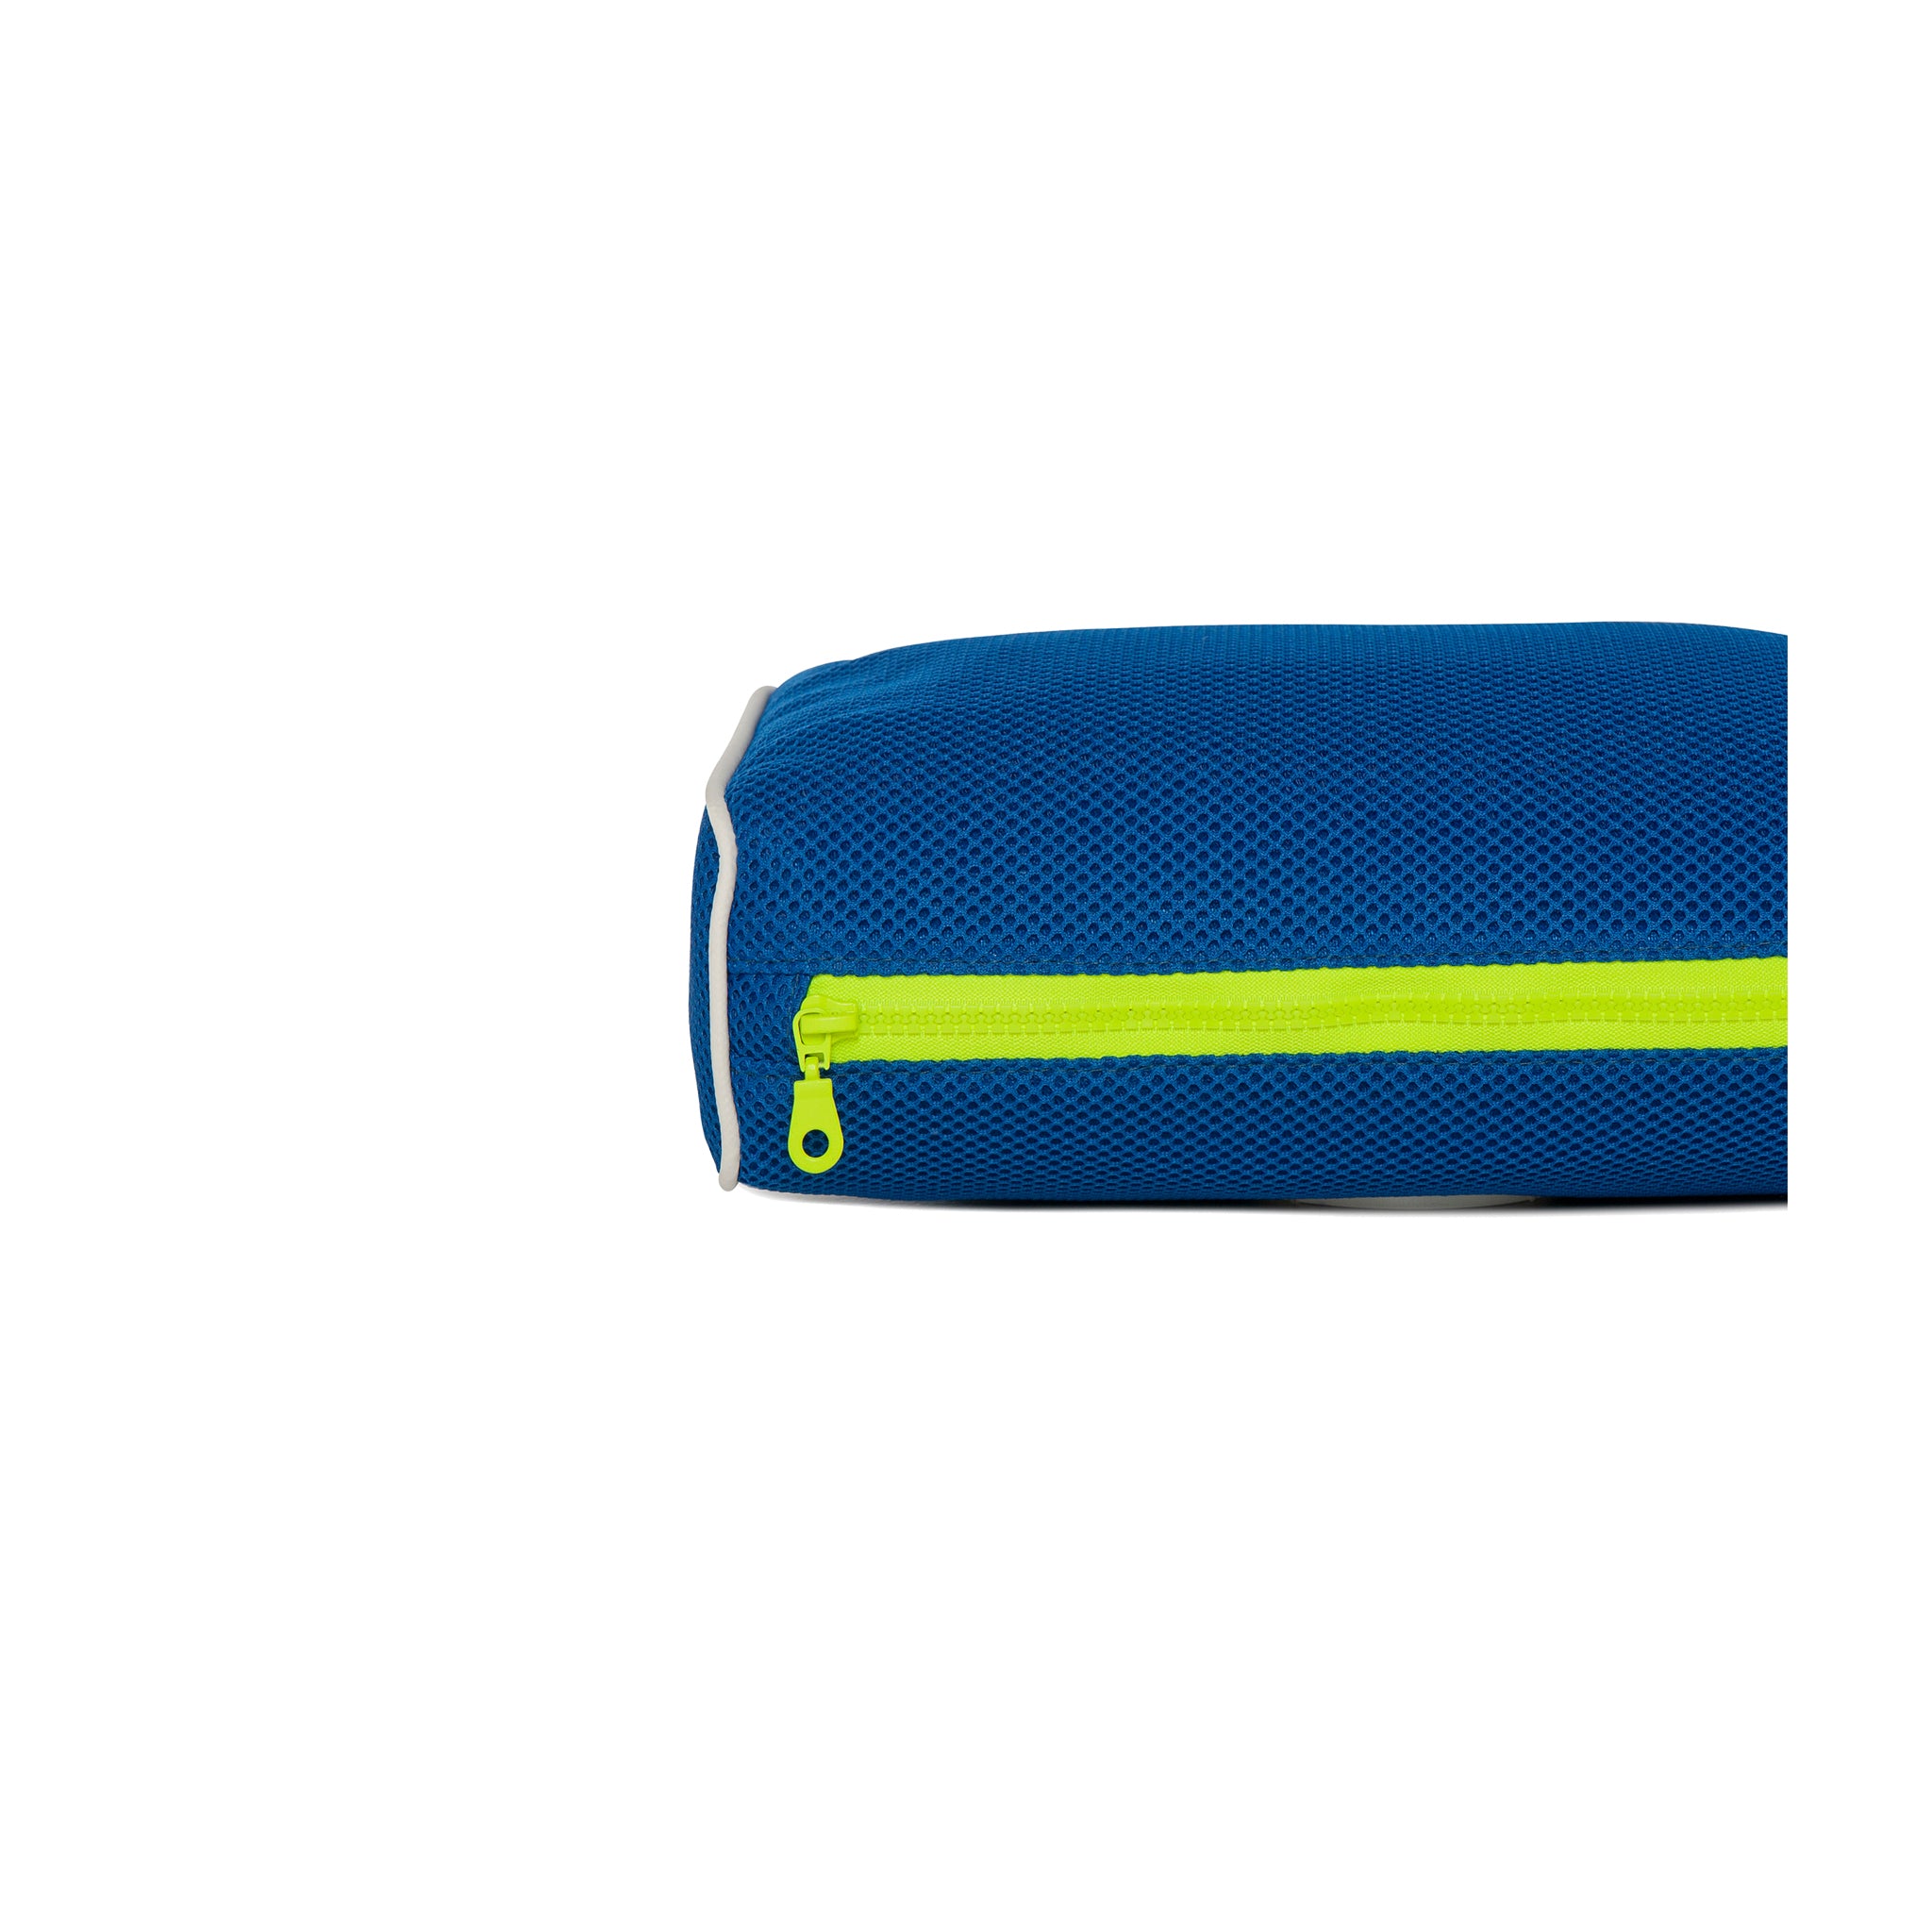 OLIVIA Pouch | Blue Bubbles Football